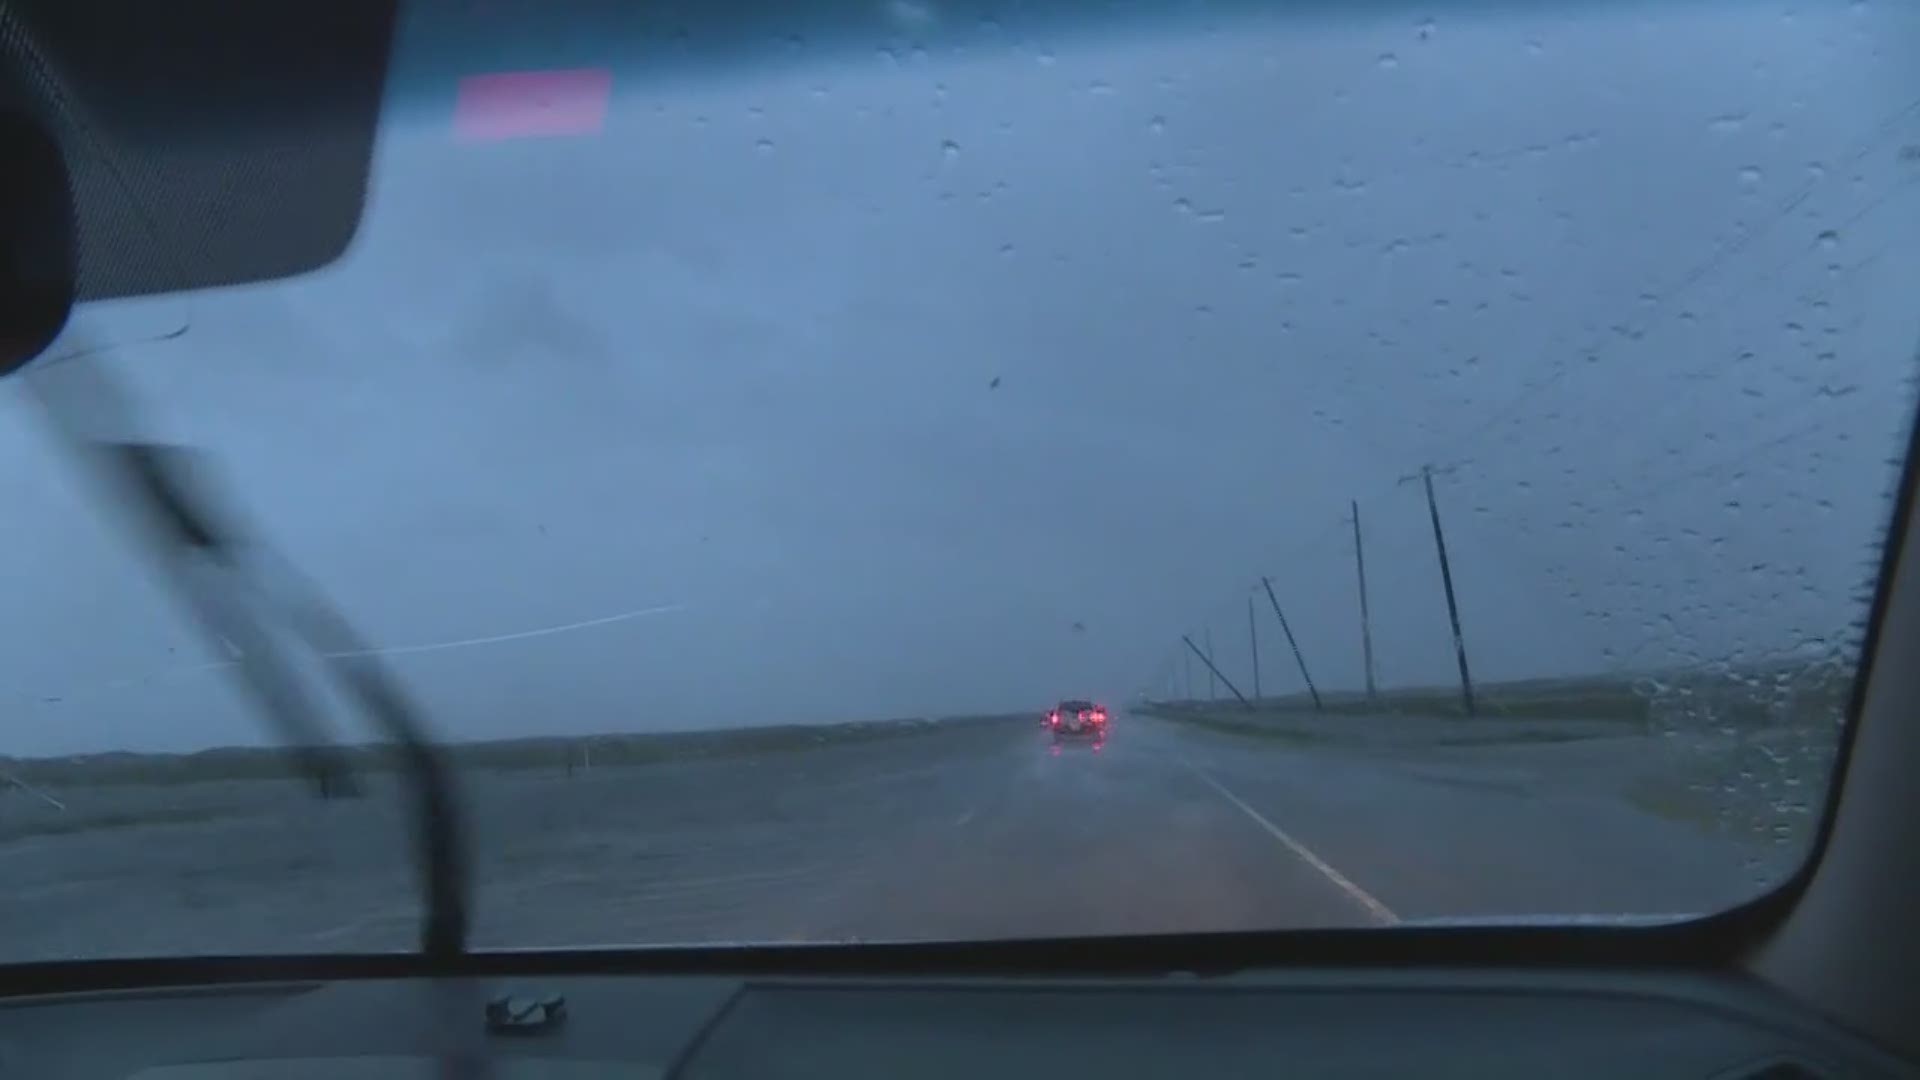 As authorities head back into Port Aransas, we get our first look at the damage heading into that area, including many downed utility poles and lines. (8/26 7 am)